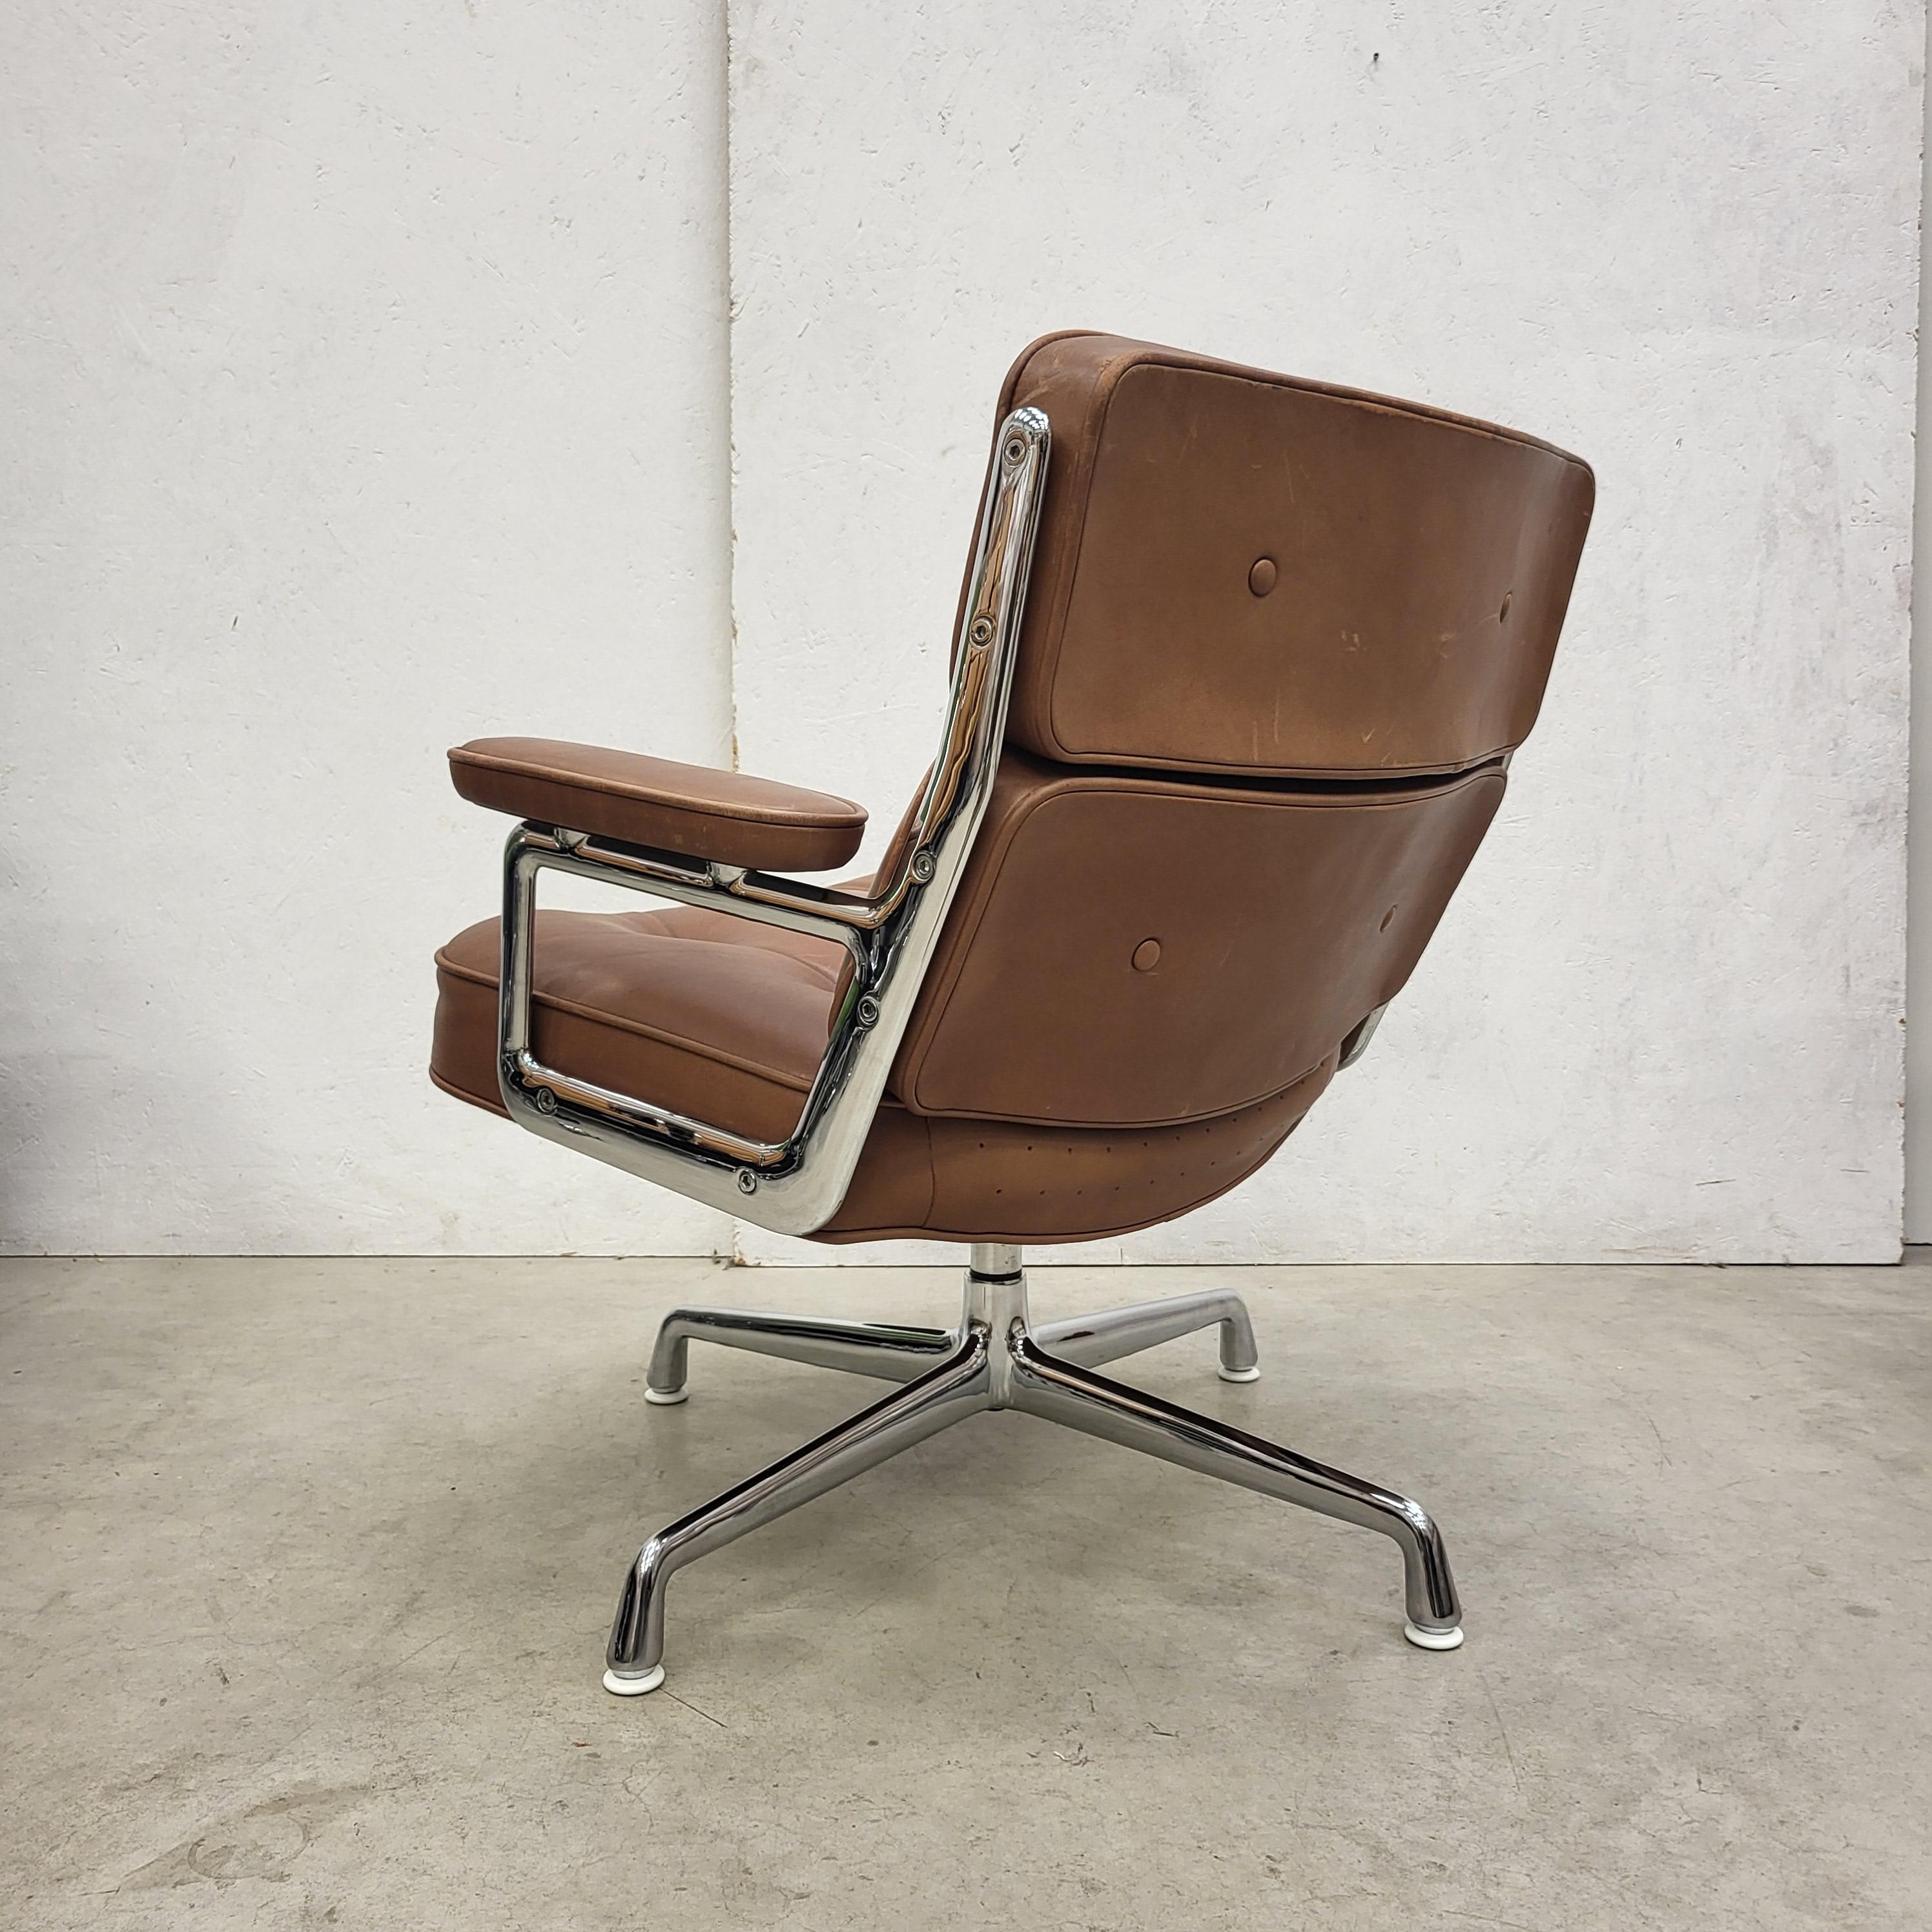 15ft Herman Miller Segmented Table & 10x Vitra ES105 Lobby Chair Charles Eames For Sale 2